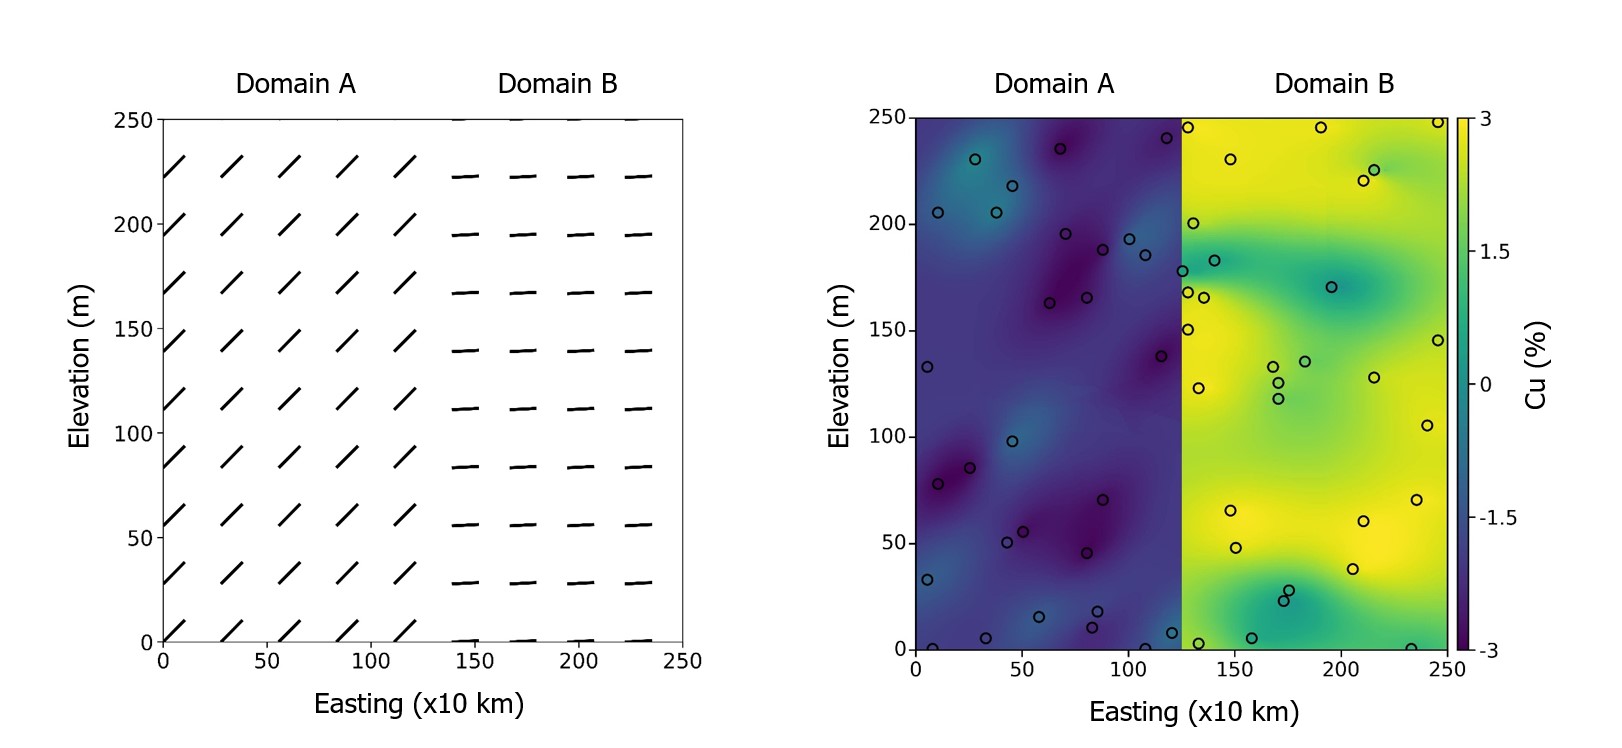 Figure 3: Hard boundary between domains. Left: LVA field in Domain A and Domain B respectively. The variogram range values are and 50m in the 45° direction (Domain A) and 75m in the 92° direction (Domain B) with an anisotropy ratio of 10:1. Right: Ordinary kriging is used to get the estimates using the continuity information obtained from the constant variograms for Domain A and Domain B.